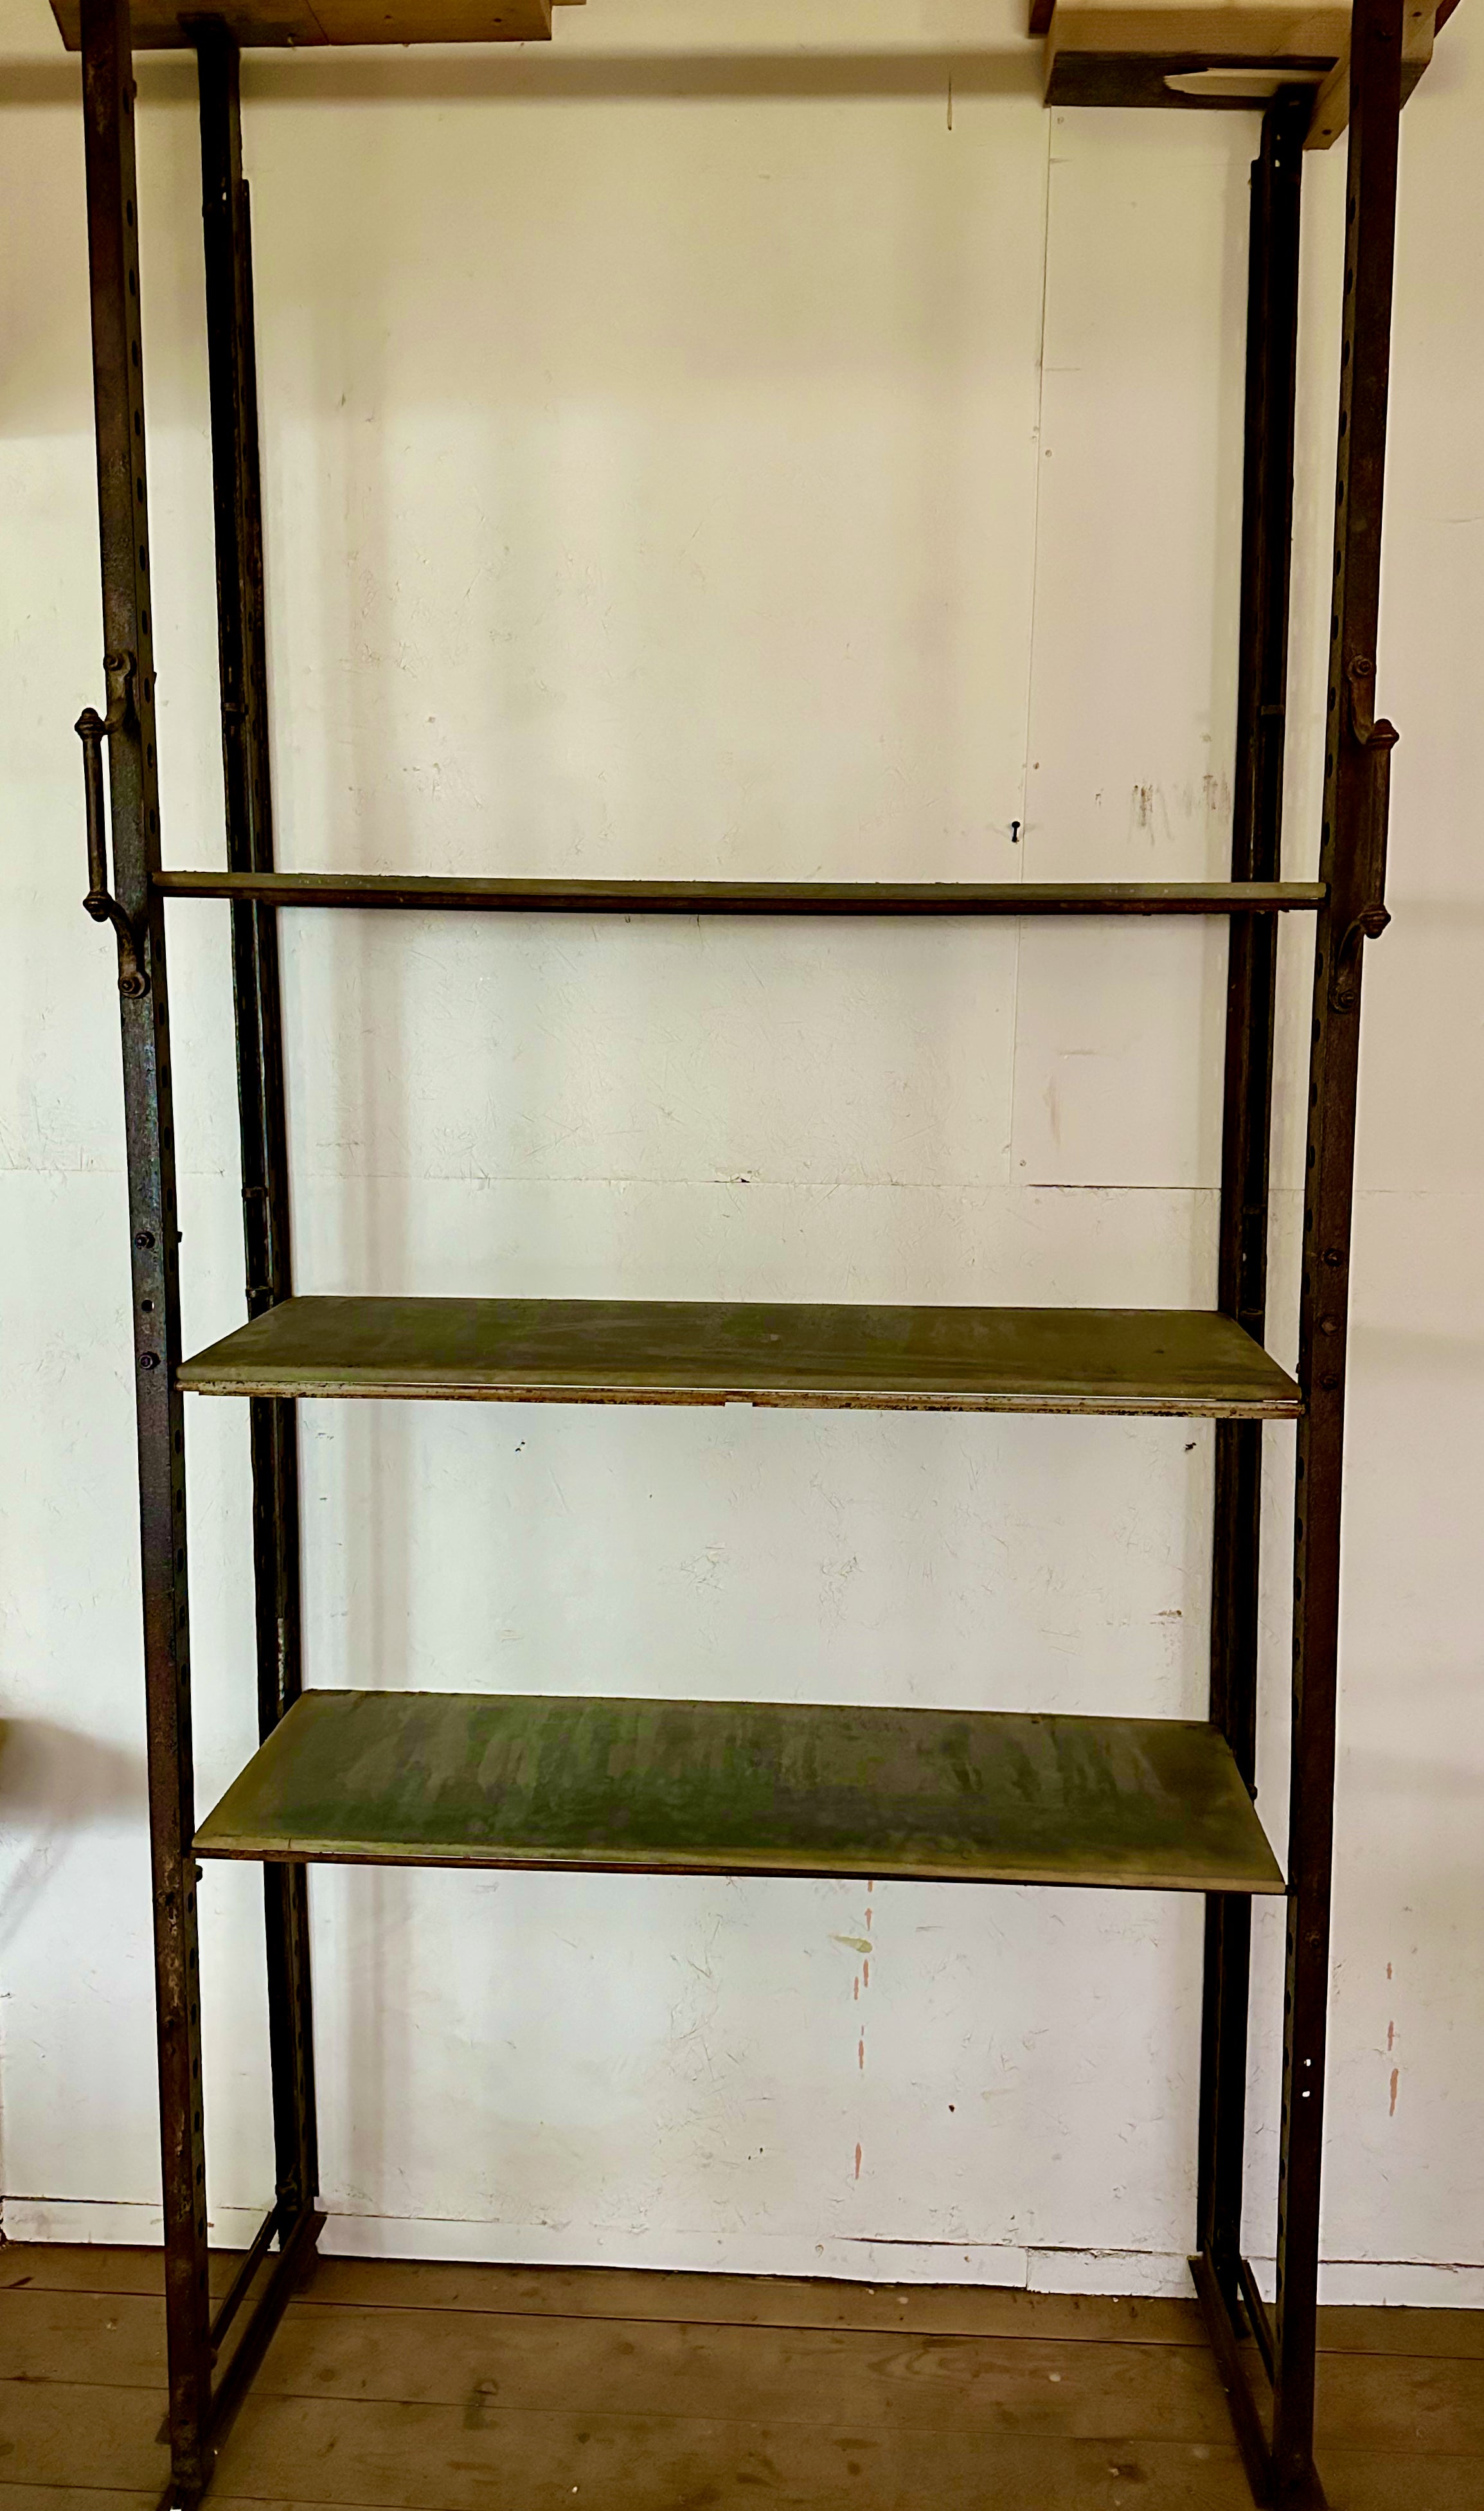 Make a statement with this hard to find, original antique industrial shelving from the archives of government building in the Netherlands.  The shelves are the original slate  used for shelving purposes at the time.  This unit comes with 4 slate